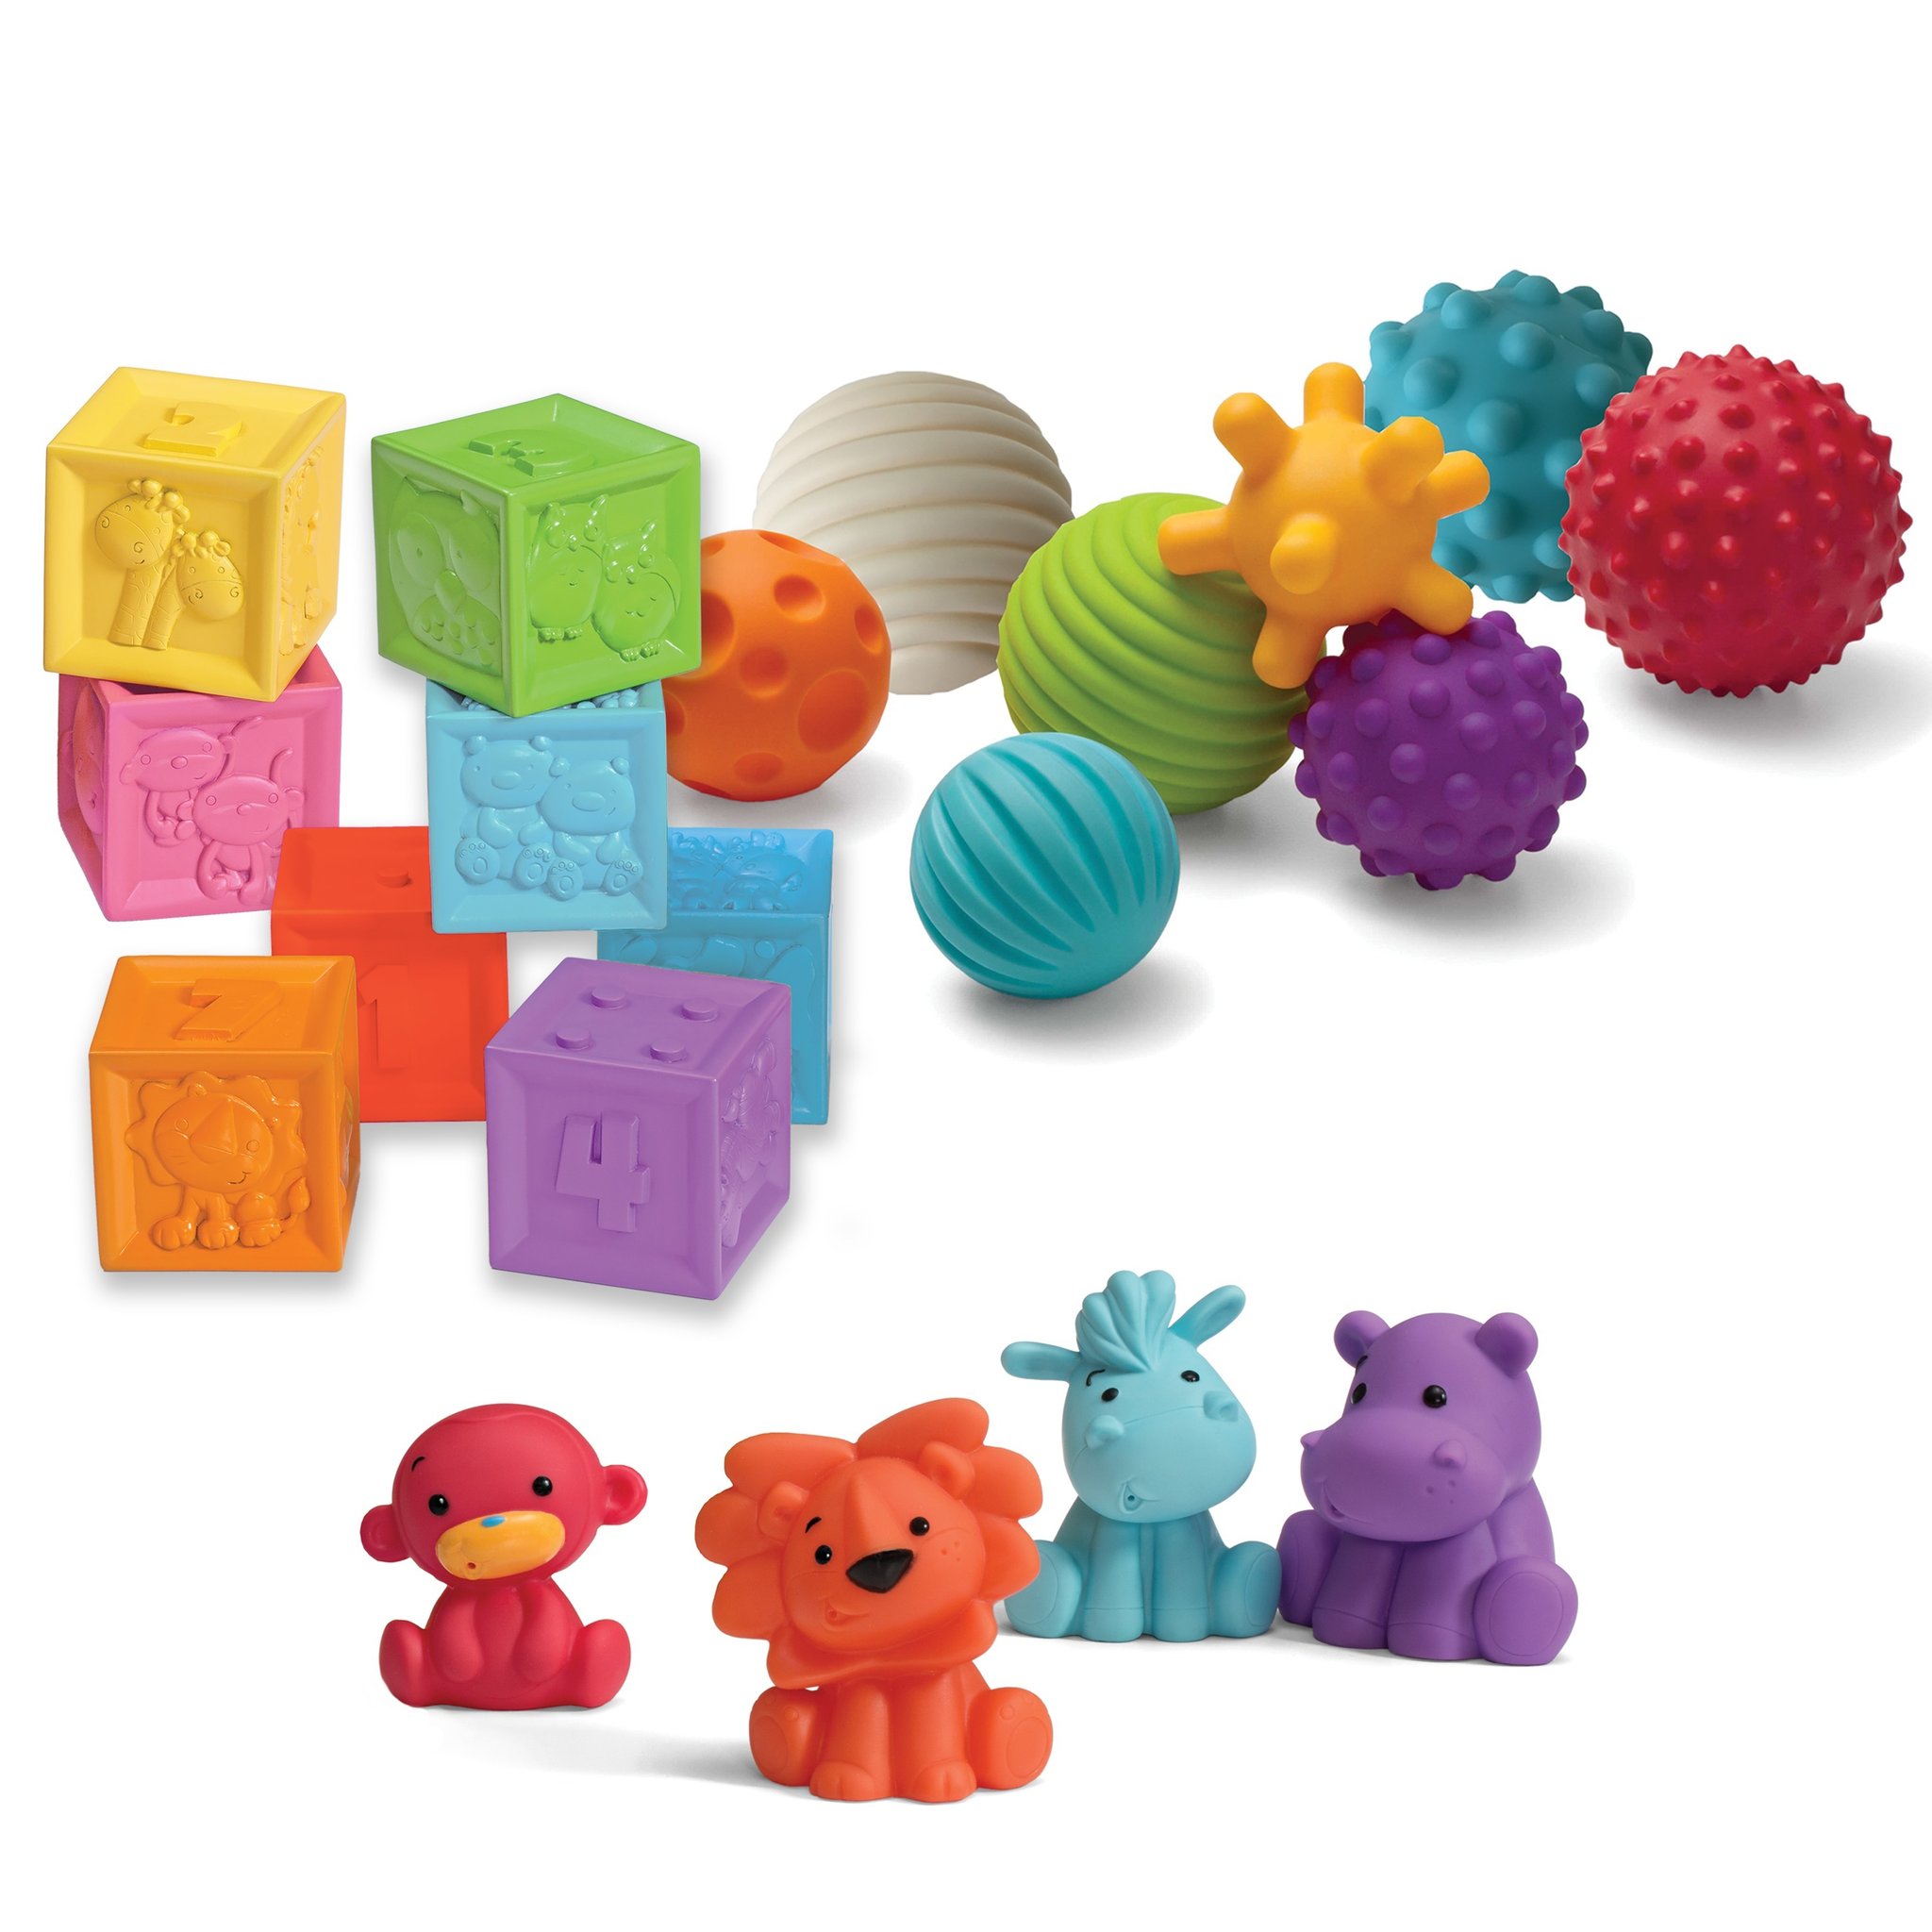 Image of Infantino Sensory Balls Blocks and Buddies - Recommended by Child Behavior Clinic